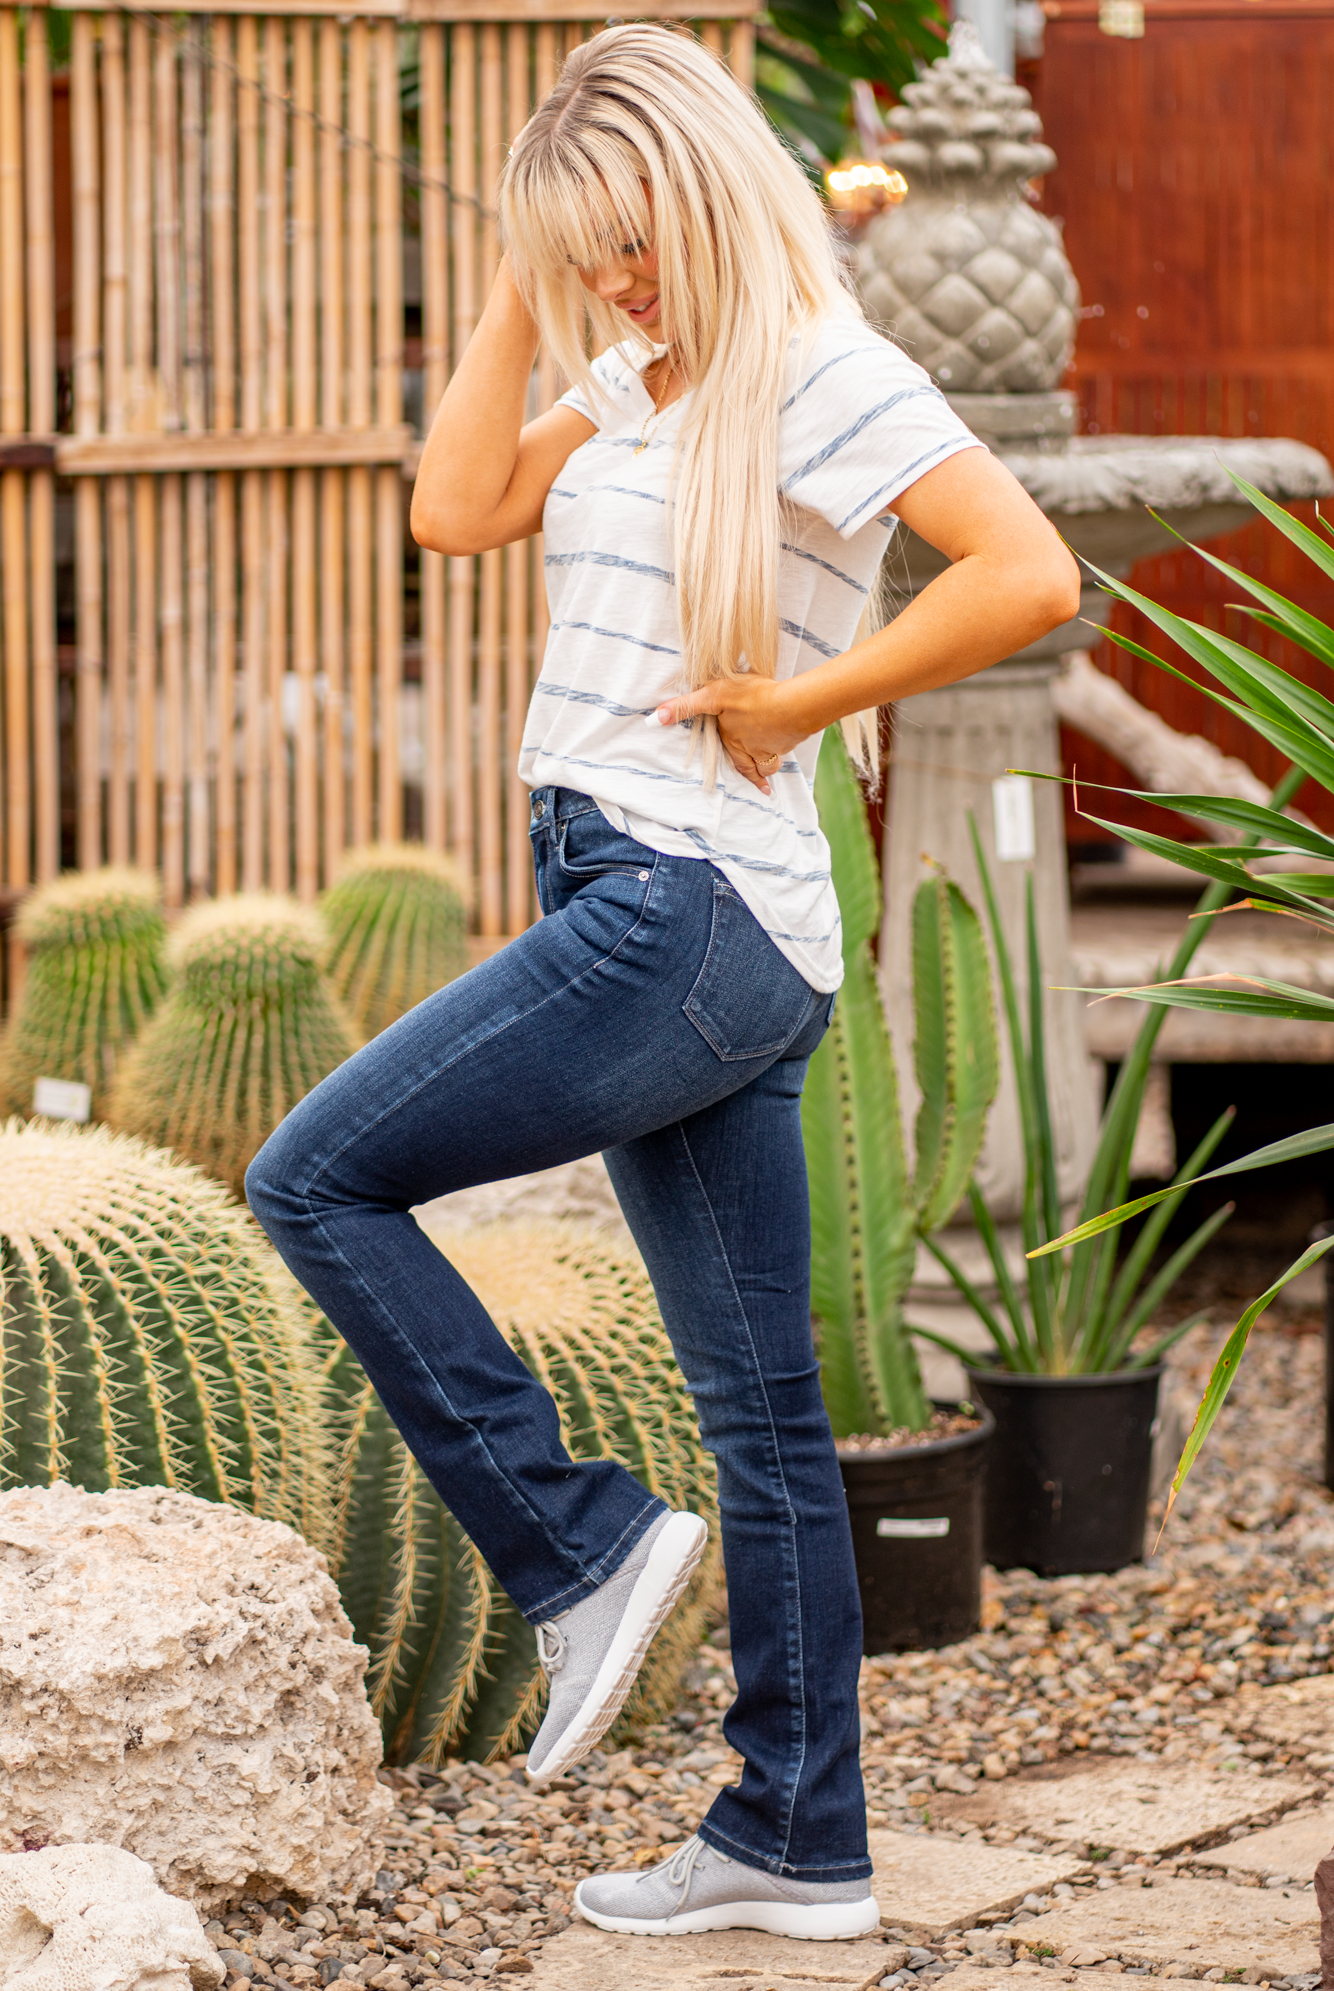 KanCan Jeans  KanCan Stretch Level: Stretchy  Color: Dark Blue Cut: Boot Cut, 32" Inseam* Rise: High-Rise, 10" Front Rise* 68% COTTON, 30% POLYESTER, 2%SPANDEX Stitching: Classic  Fly: Zipper Style #: KC8683D  Contact us for any additional measurements or sizing.  *Measured on the smallest size, measurements may vary by size.